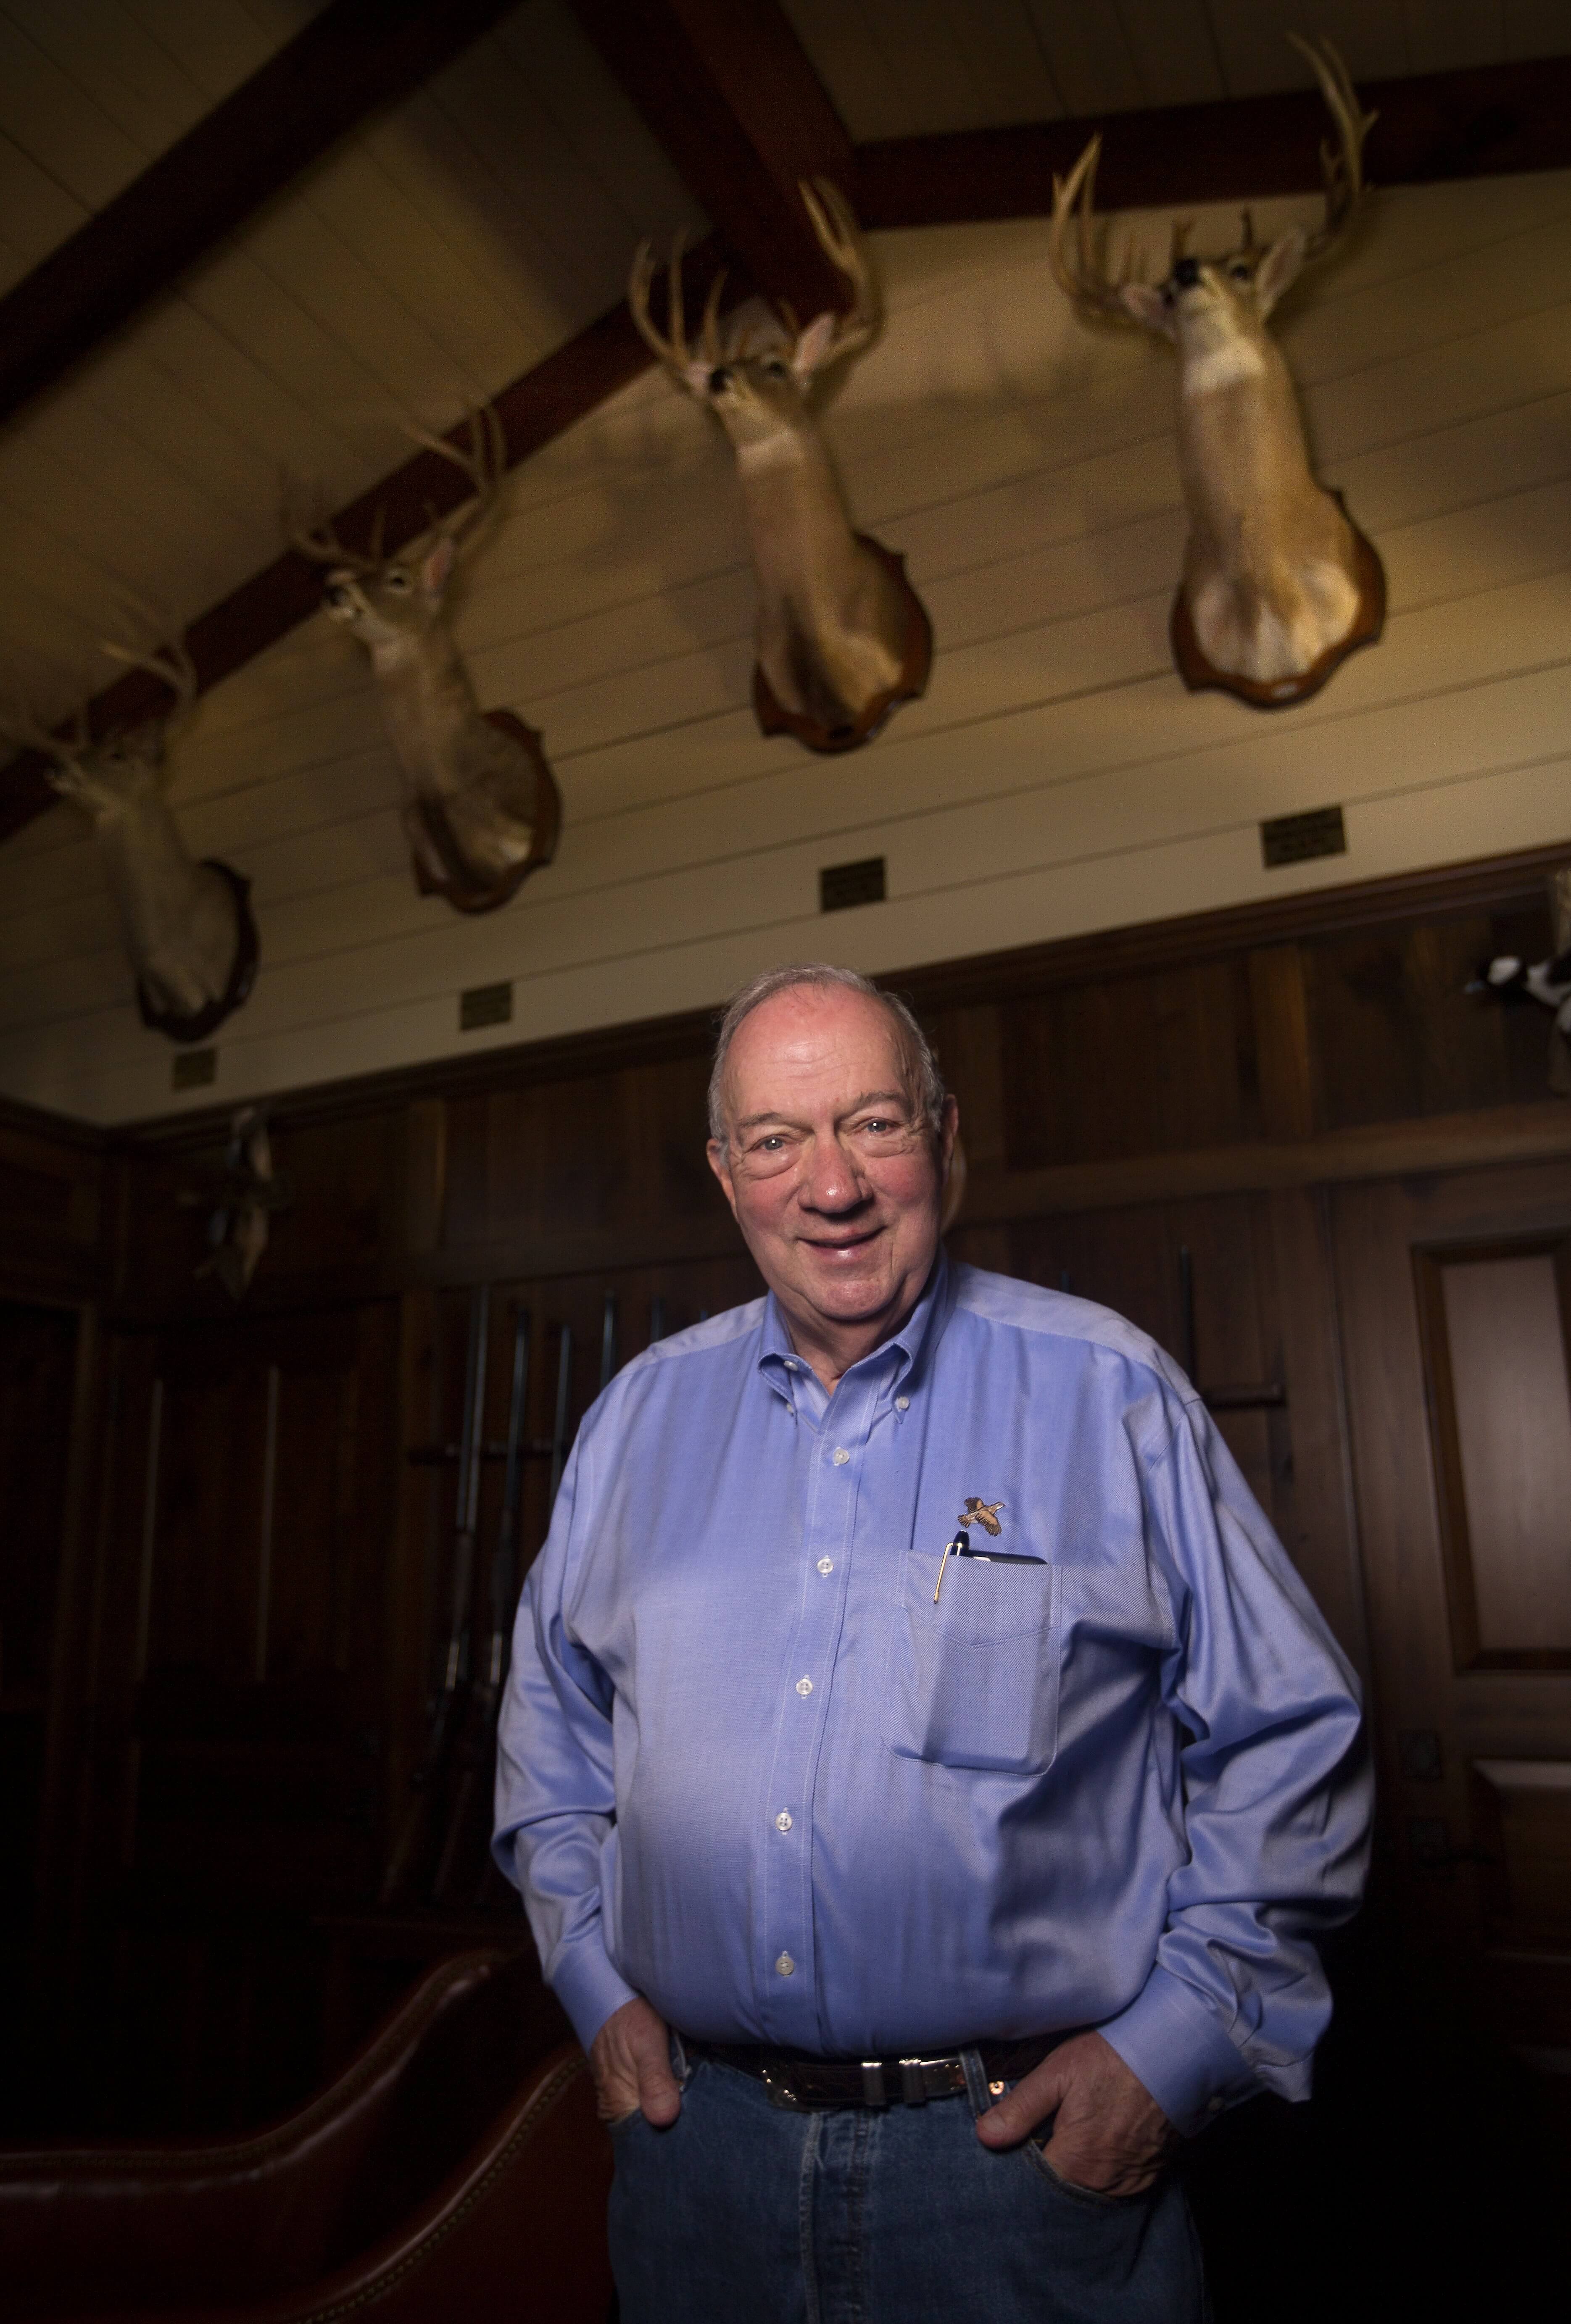 Philanthropist Berdon Lawrence at his South Texas ranch. His personal experience with severe osteoporosis led to the Rolannette and Berdon Lawrence Bone Disease Program of Texas.